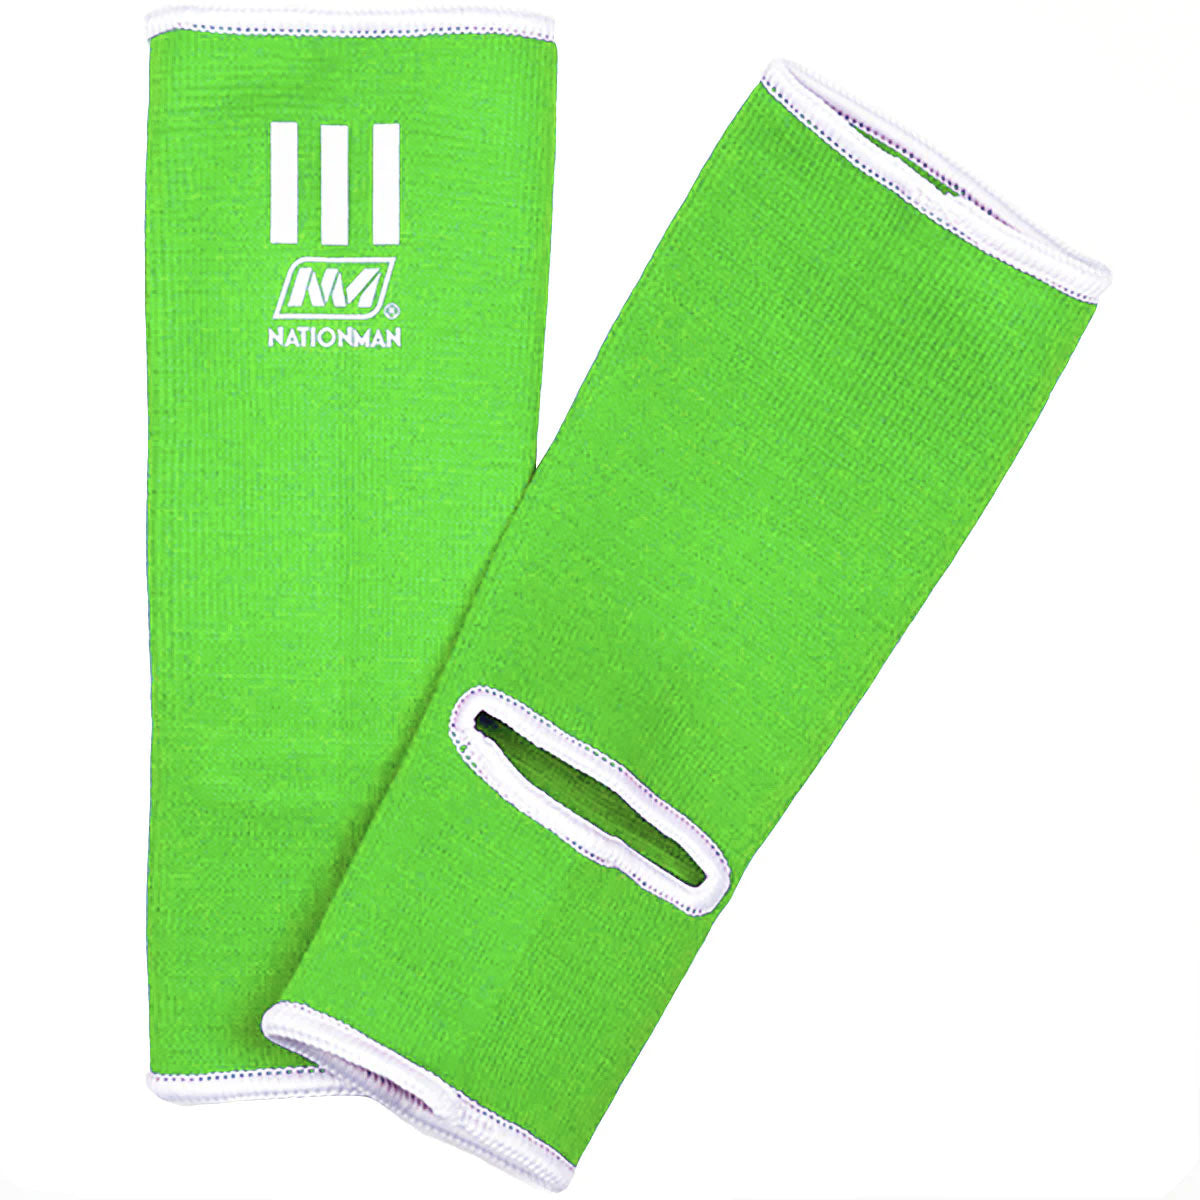 Nationman NMAK Green Ankle Support